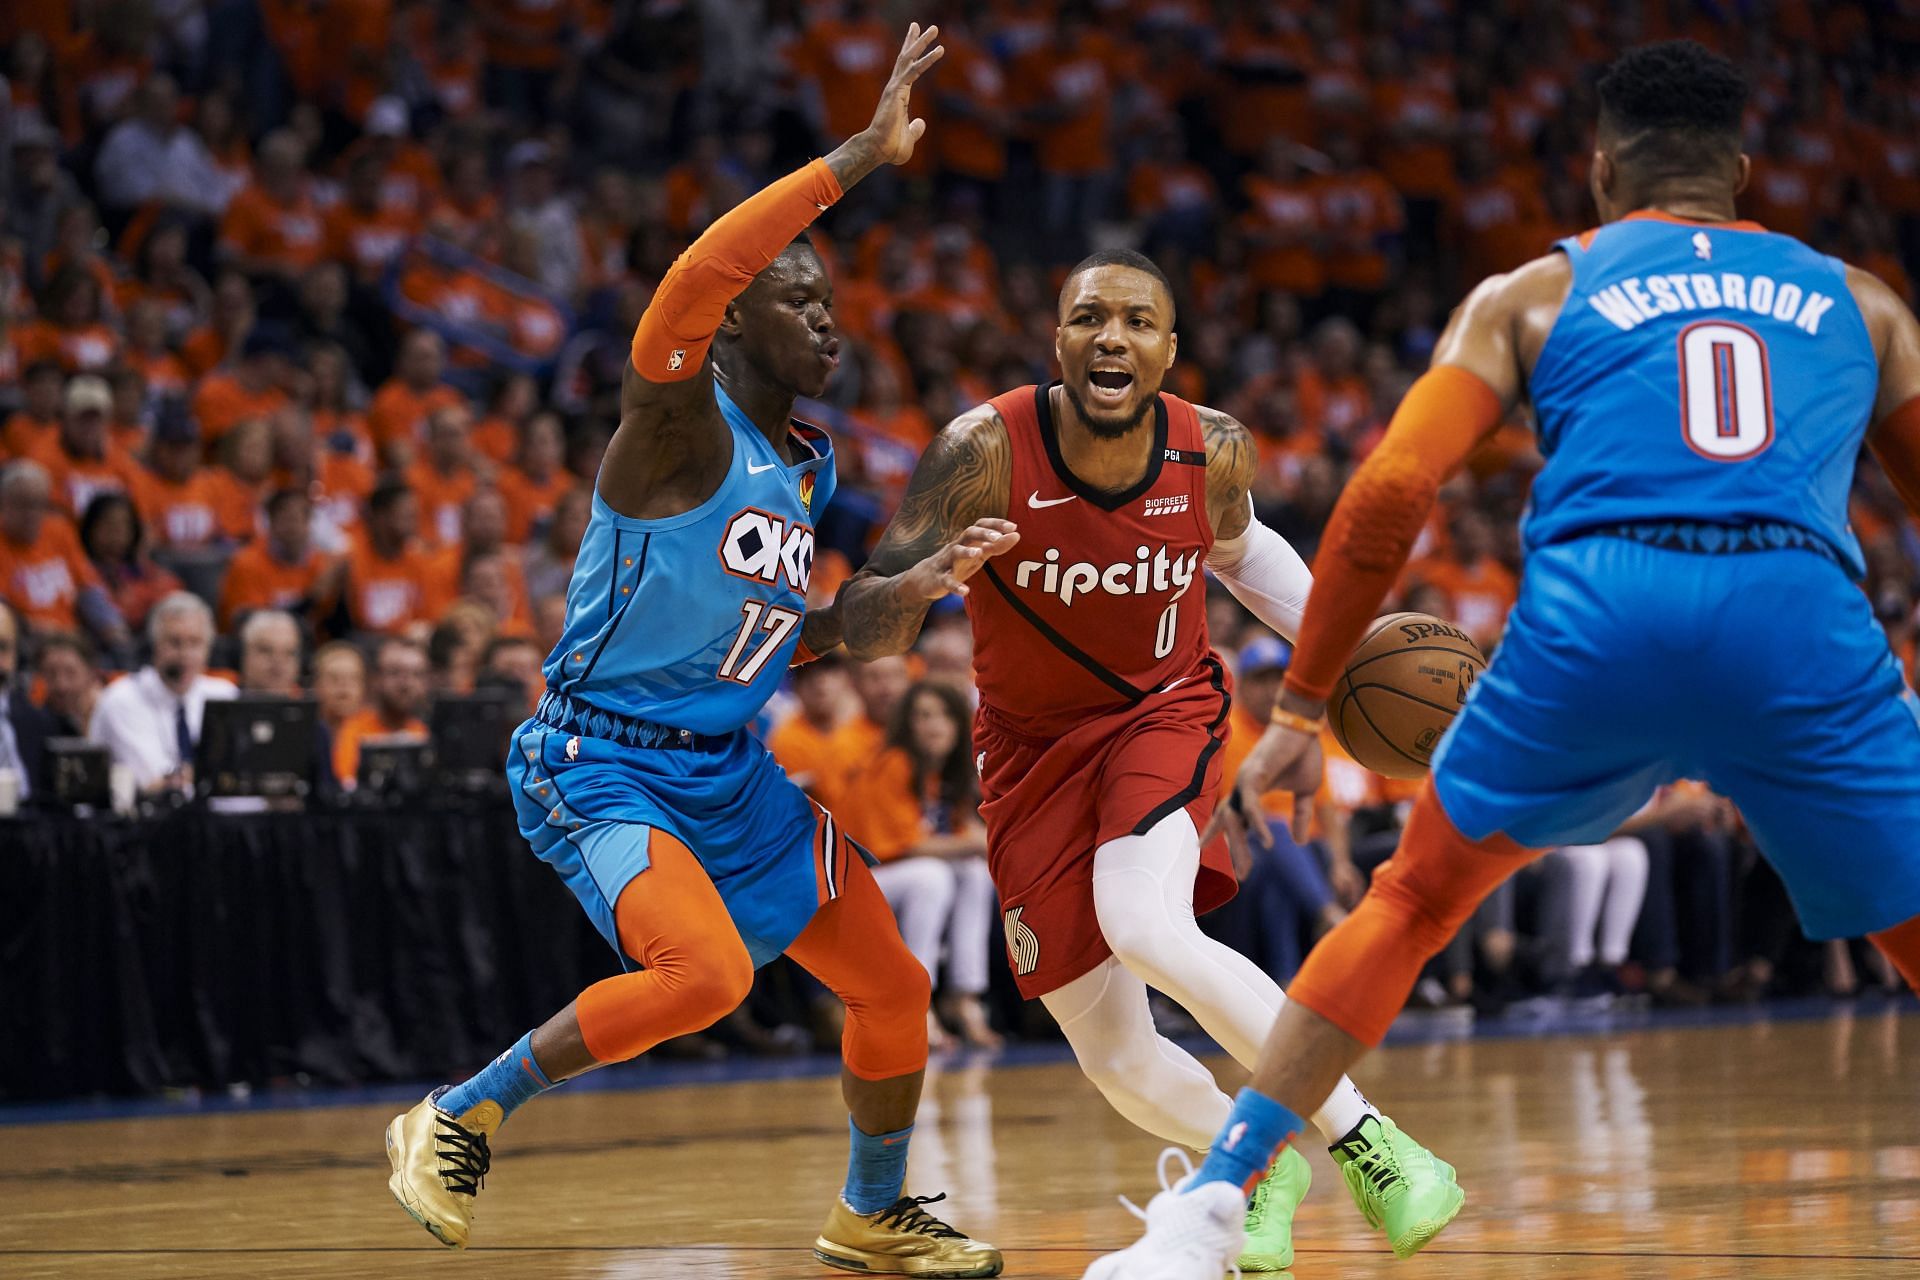 Damian Lillard #0 of the Portland Trail Blazers drives to the basket against Dennis Schroder #17 and Russell Westbrook #0 of the Oklahoma City Thunder during the first half of game three of the Western Conference quarterfinals at Chesapeake Energy Arena on April 19, 2019 in Oklahoma City, Oklahoma.